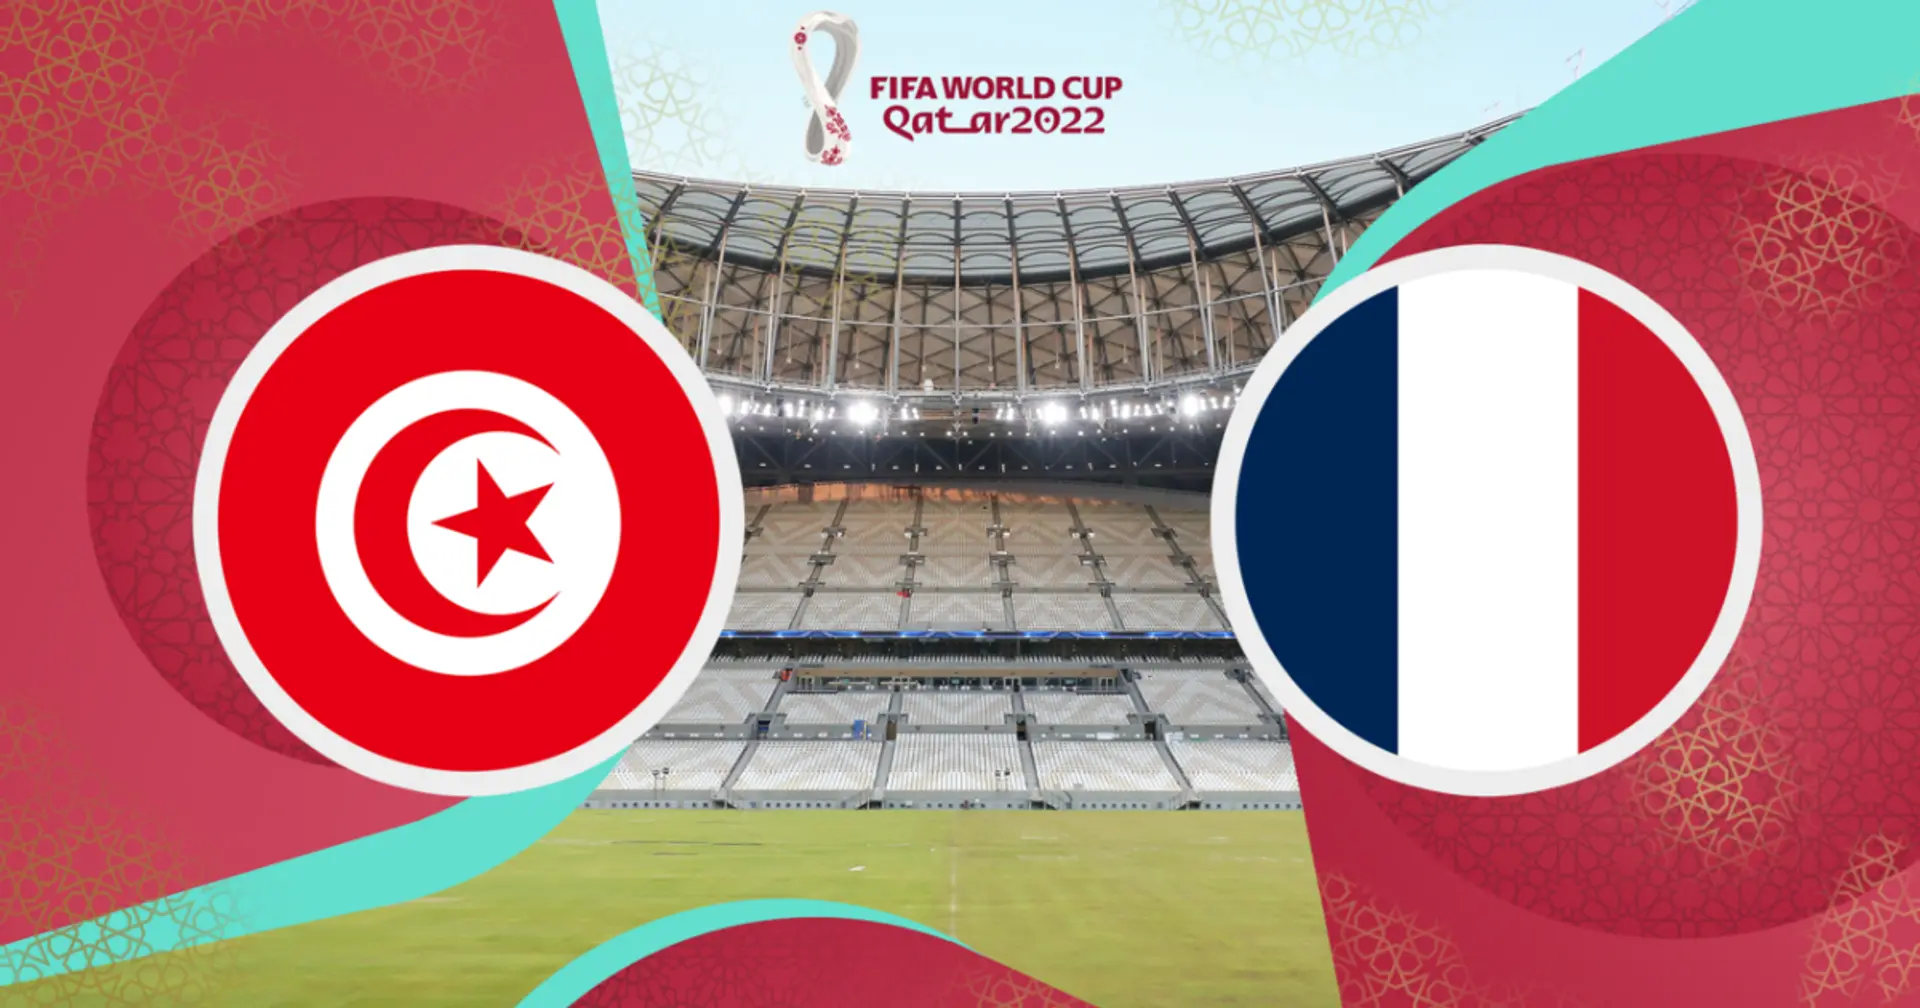 Tunisia vs France: Official team lineups for the World Cup clash revealed